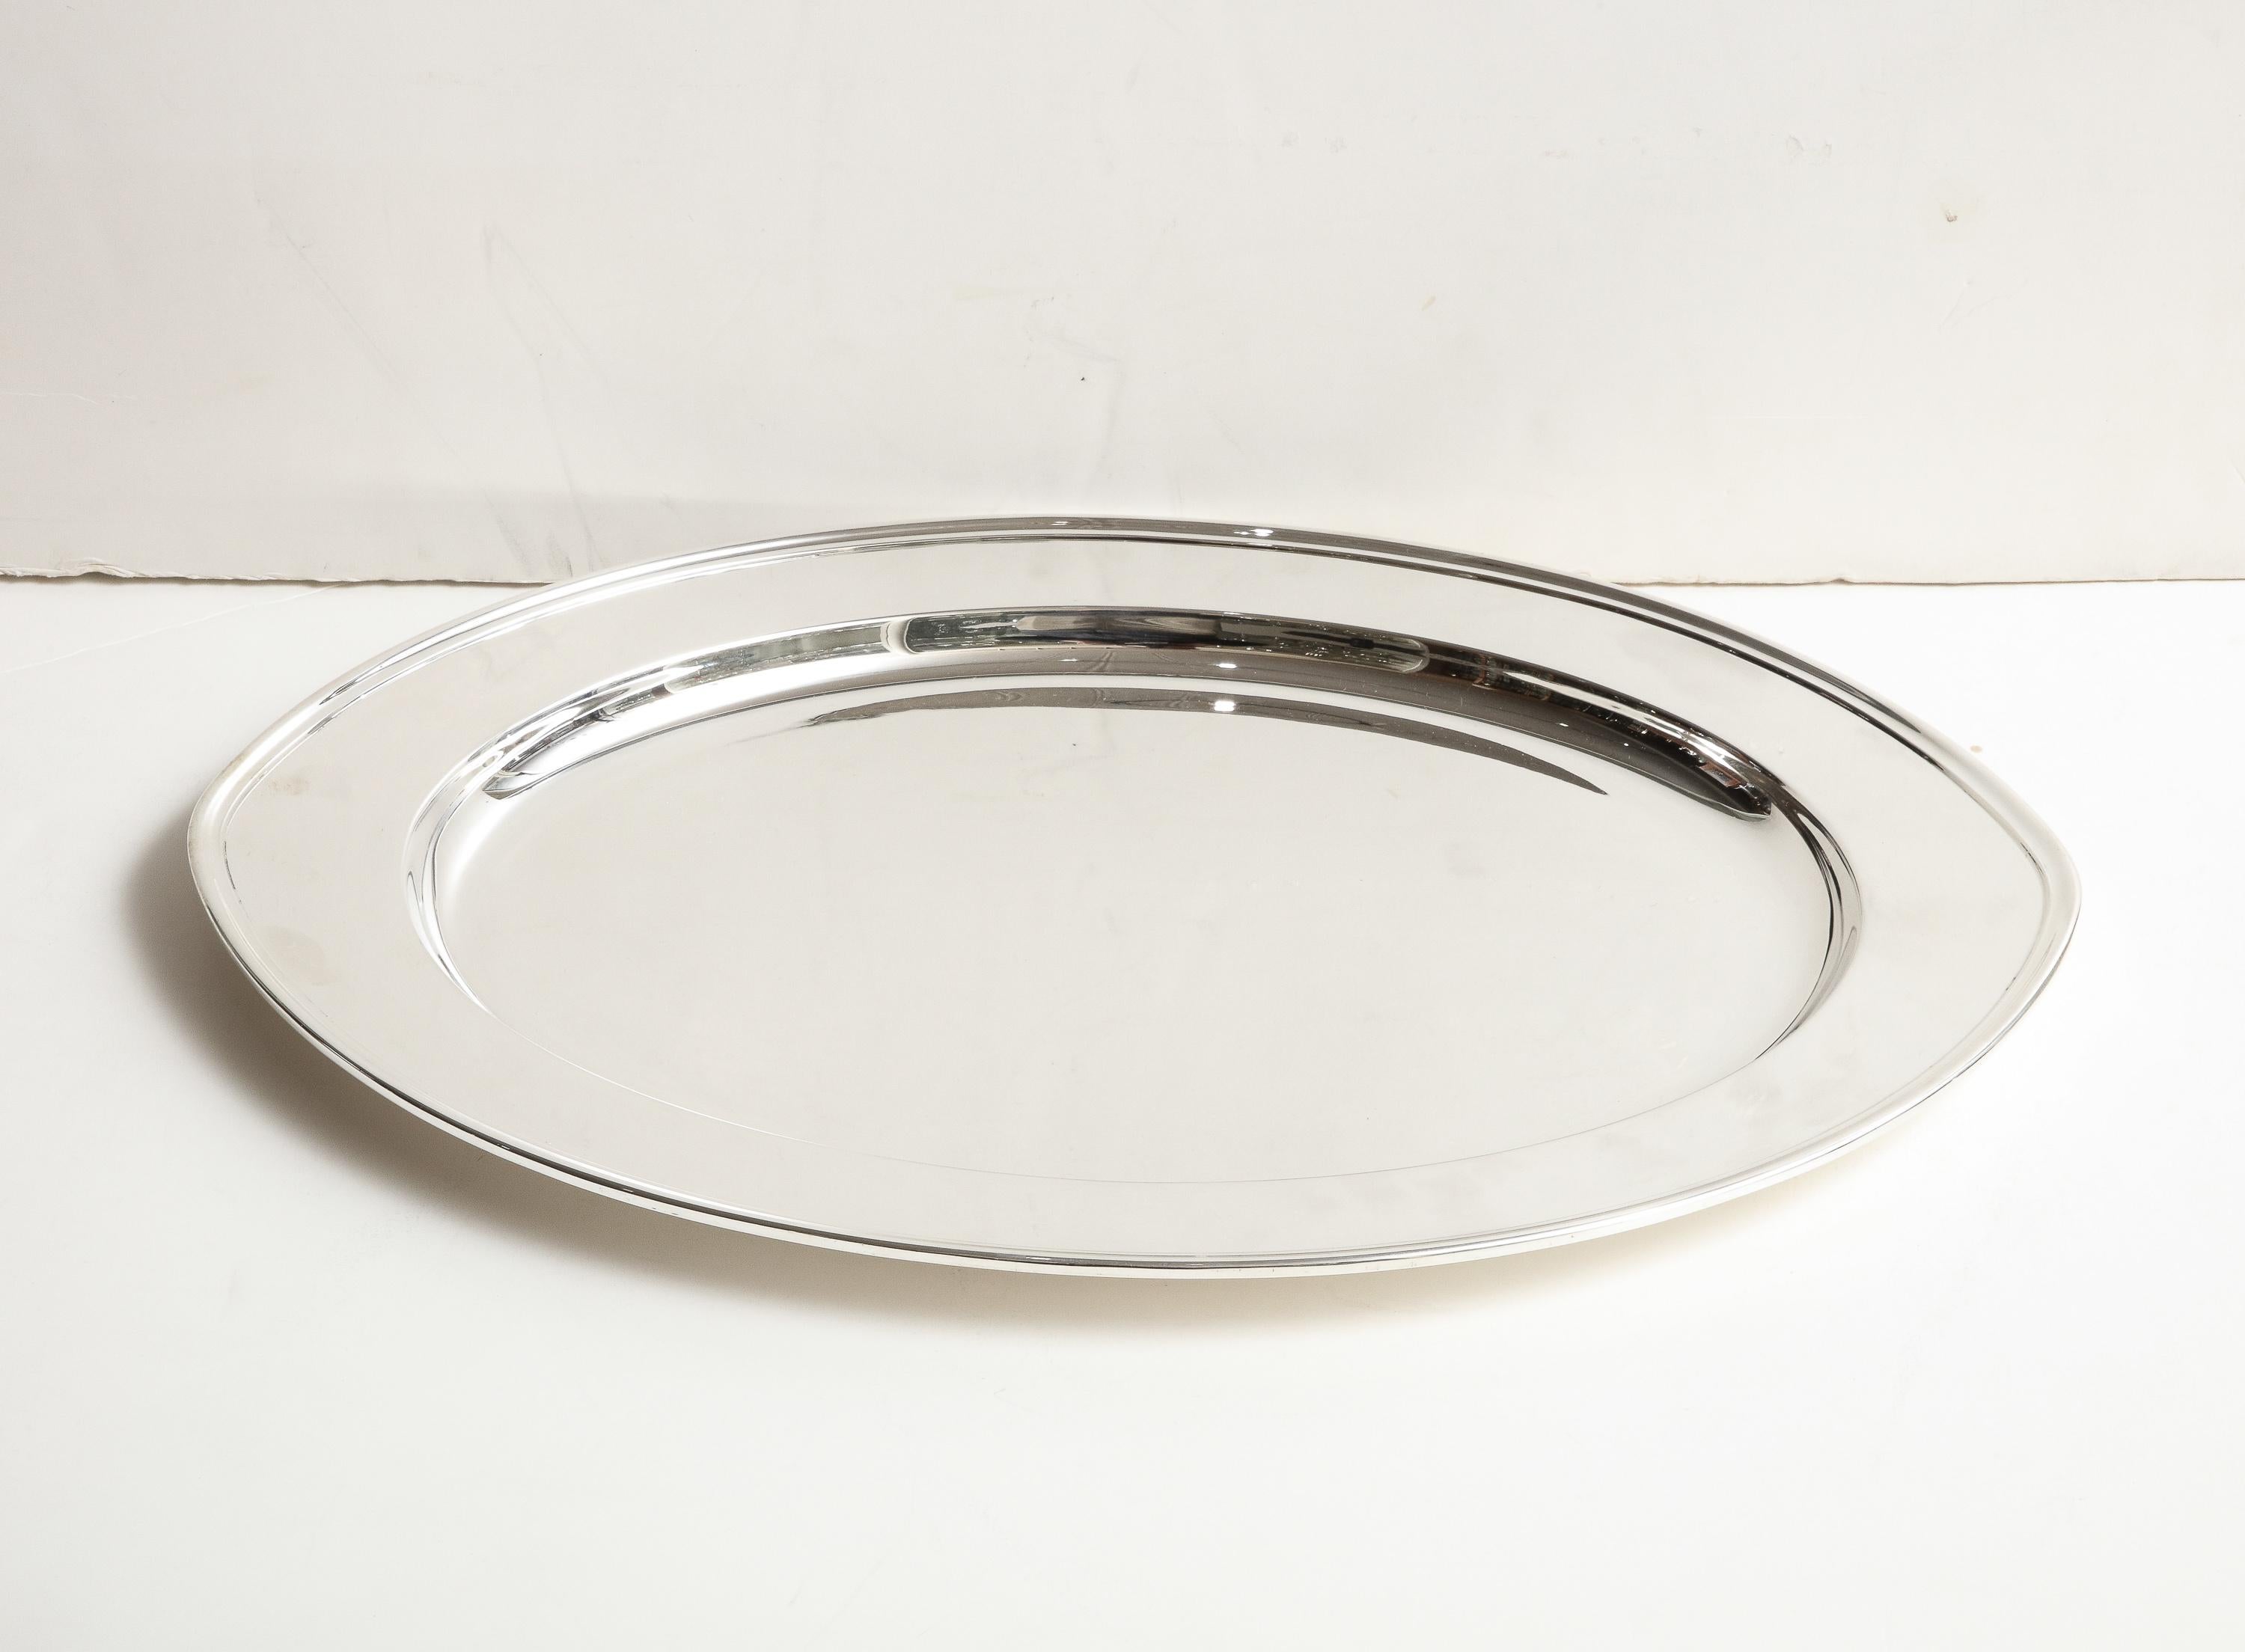 American Large Art Deco Period Solid Sterling Silver Serving Platter By Gorham For Sale